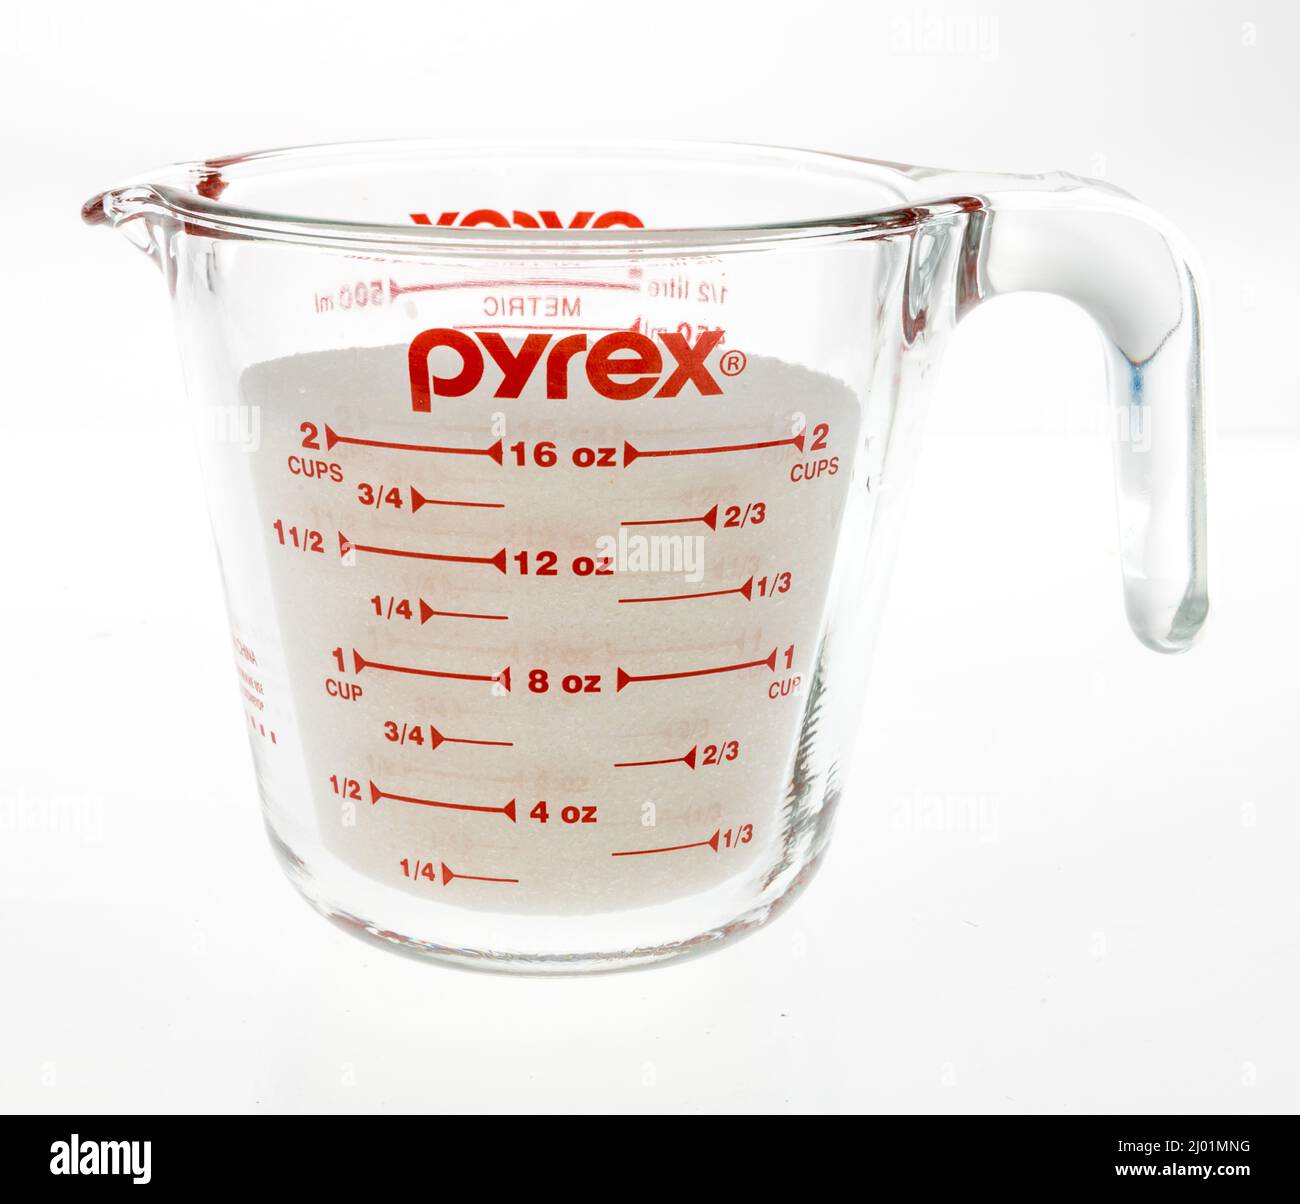 Winneconne, WI -11 March 2021: A package of Pyrex measuring cup on an isolated background Stock Photo